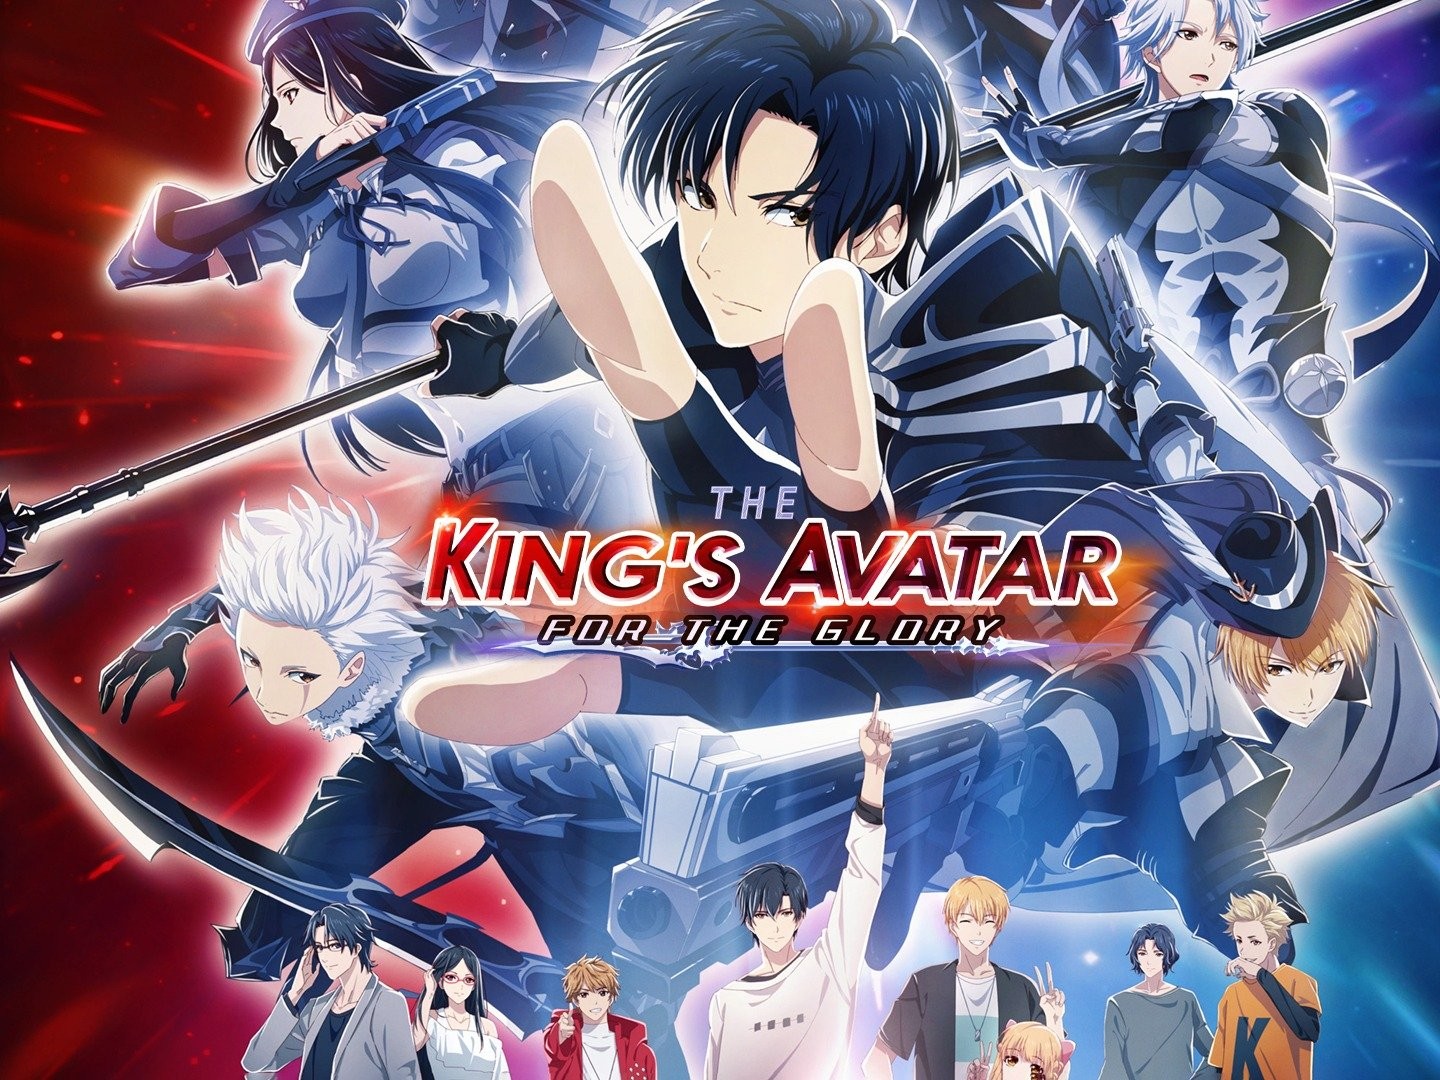 The King's Avatar - For the Glory - Rotten Tomatoes